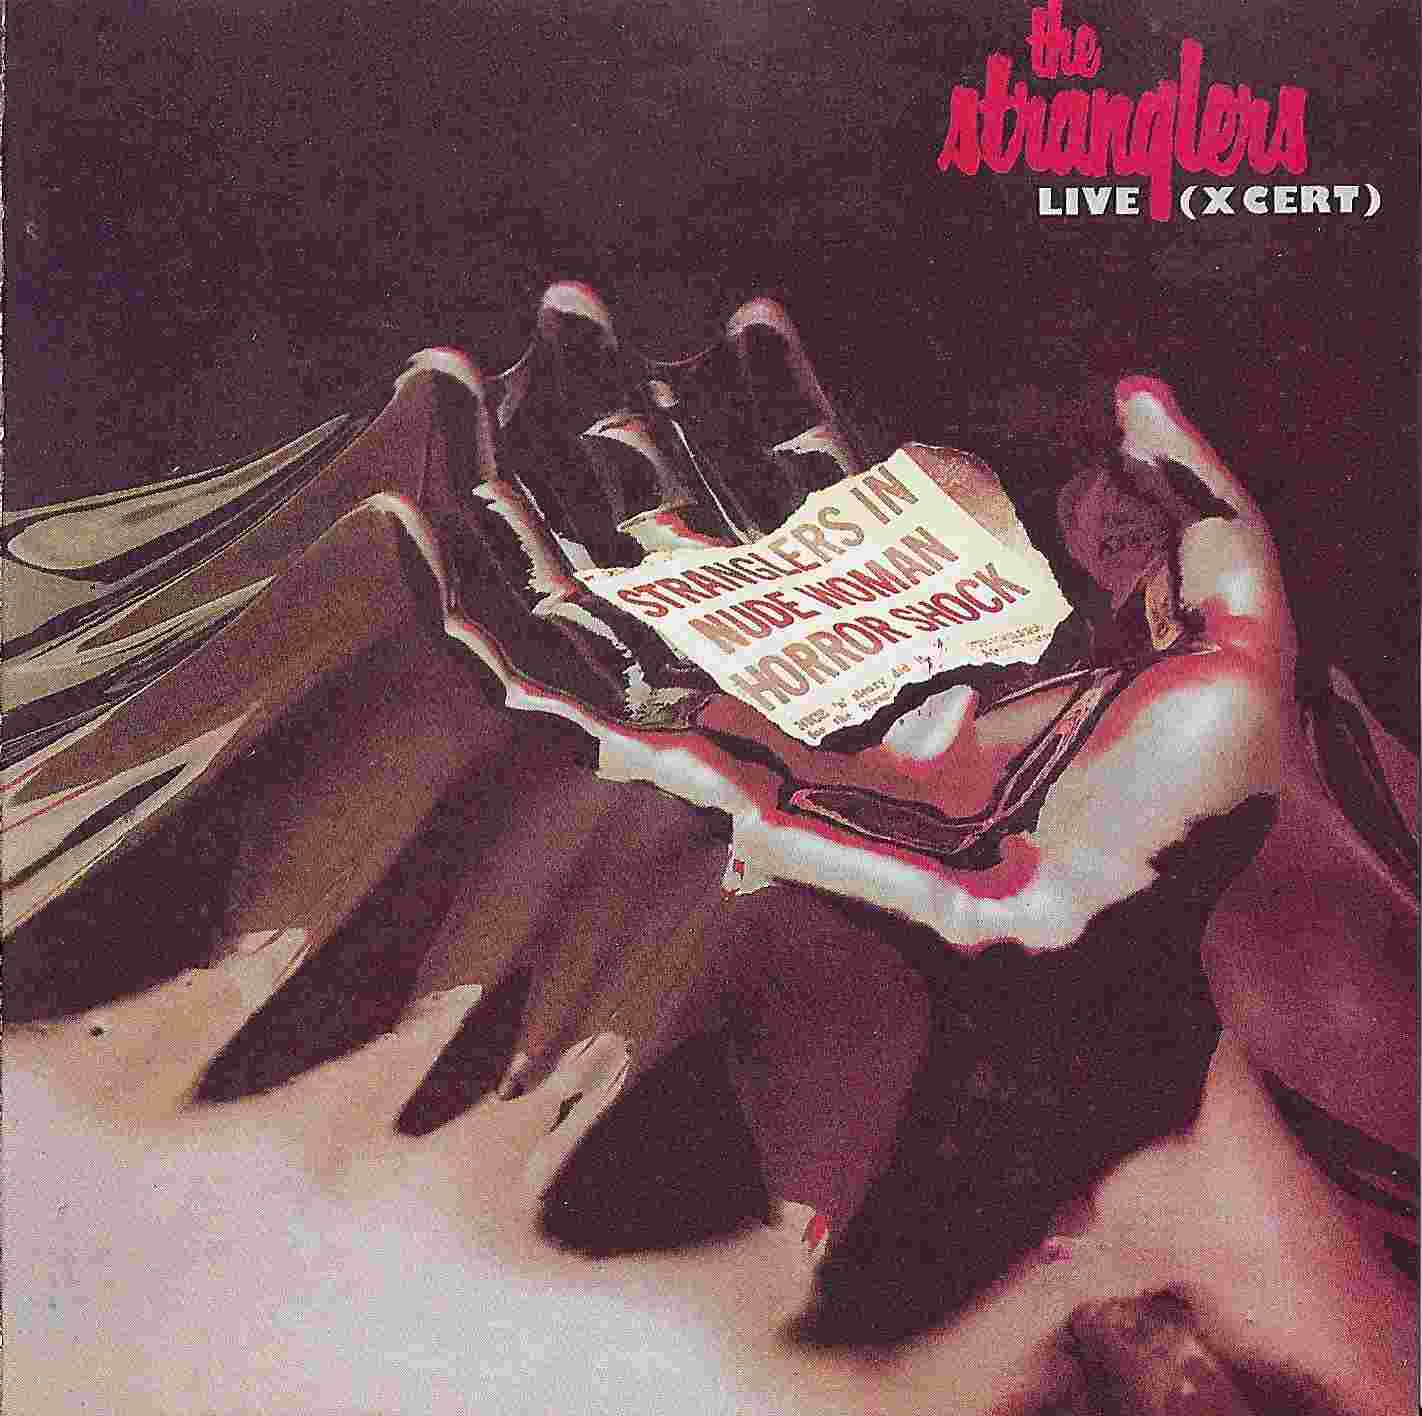 Picture of CDP 790597 2 Live (X-cert) by artist The Stranglers